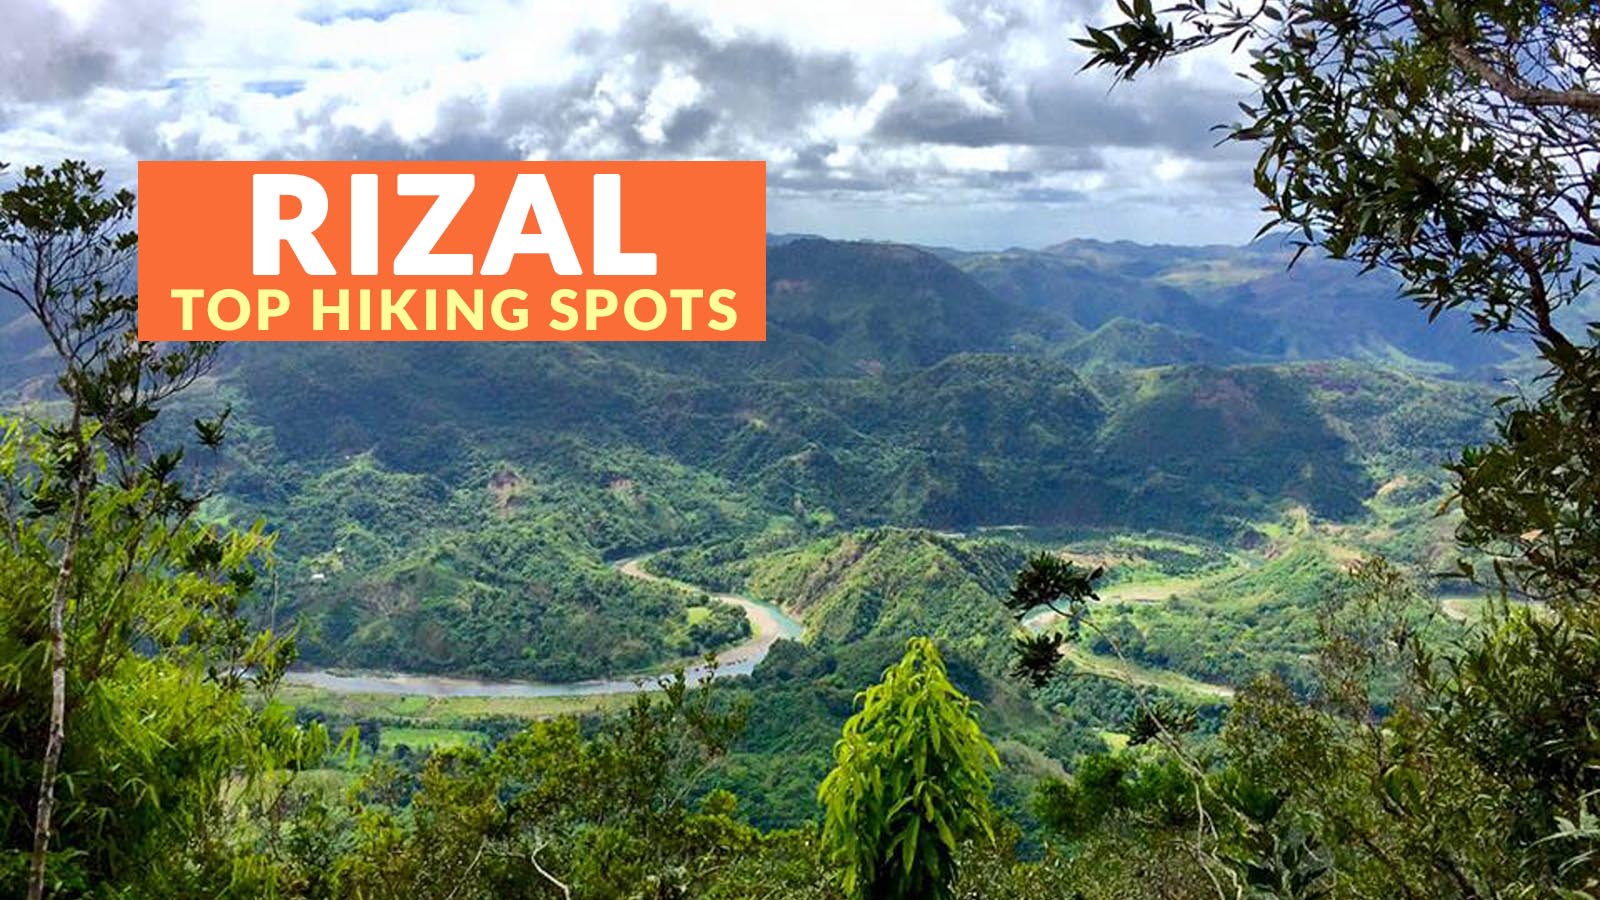 9 Tourist Spots For Your Rizal Itinerary Philippine Beach Guide